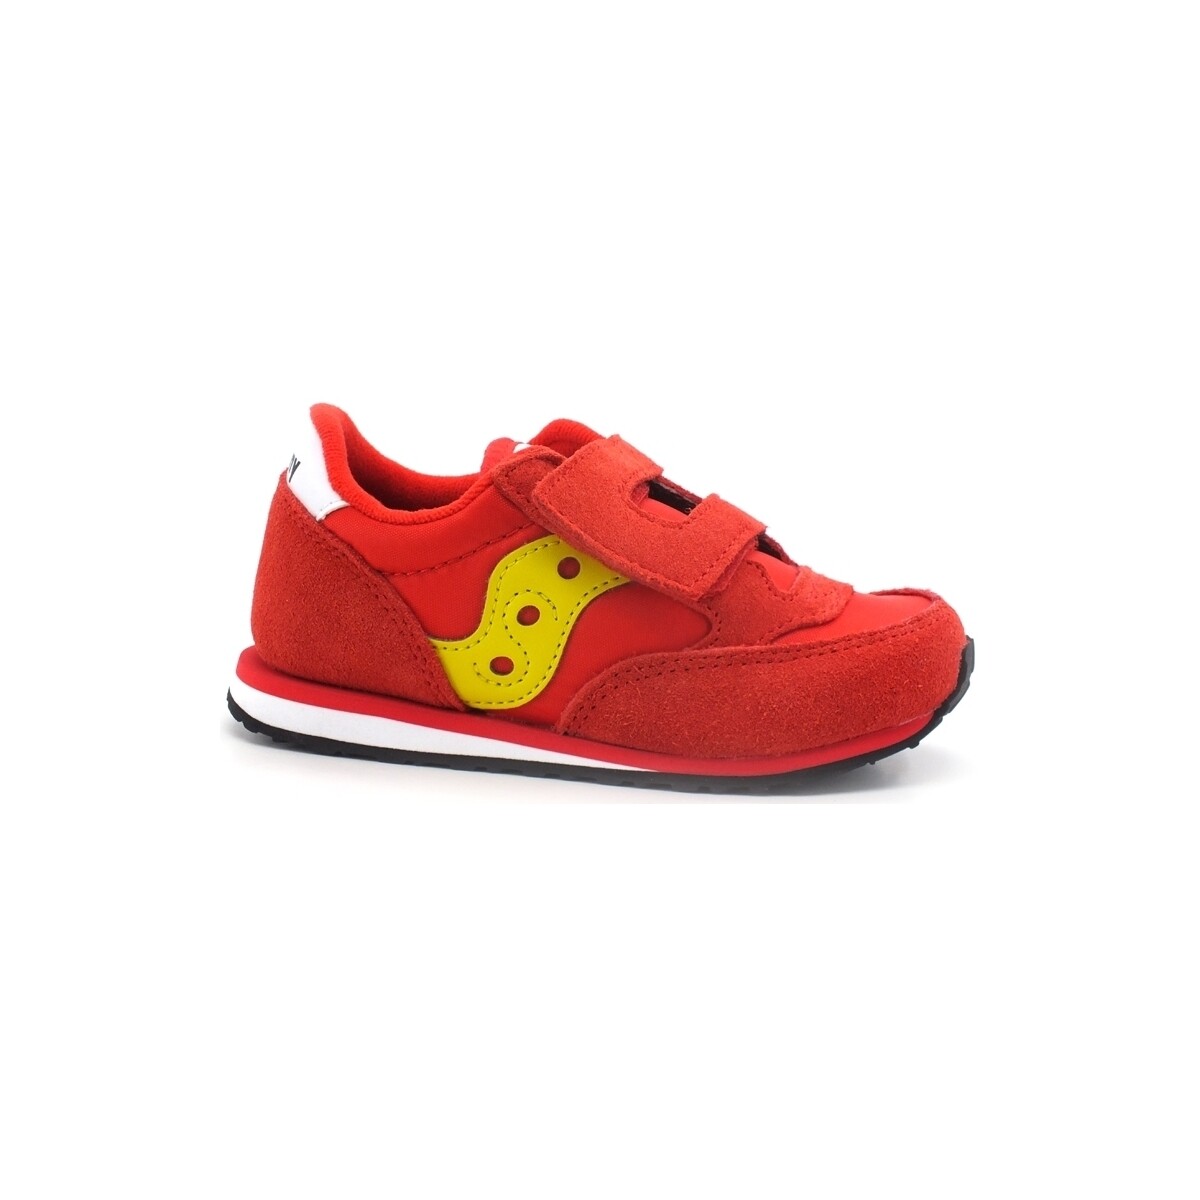 Chaussures Femme Bottes Saucony Baby Jazz HL Sneaker Red Yellow SL264802 Rouge